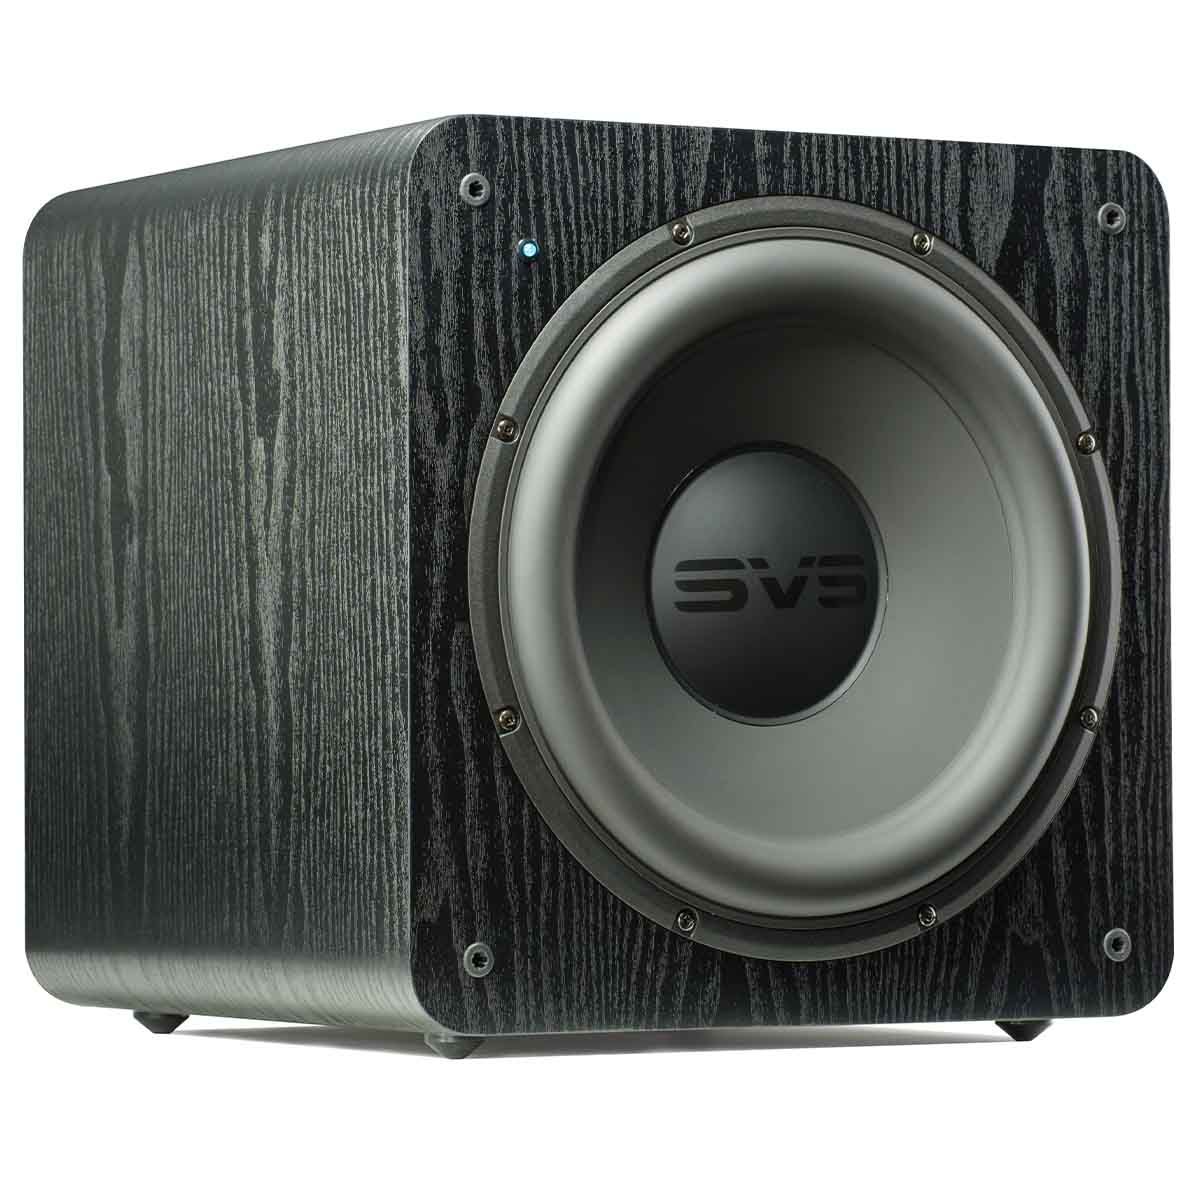 SVS SB-2000 12" Compact Sealed Subwoofer - Premium Black Ash - angled front view without grille